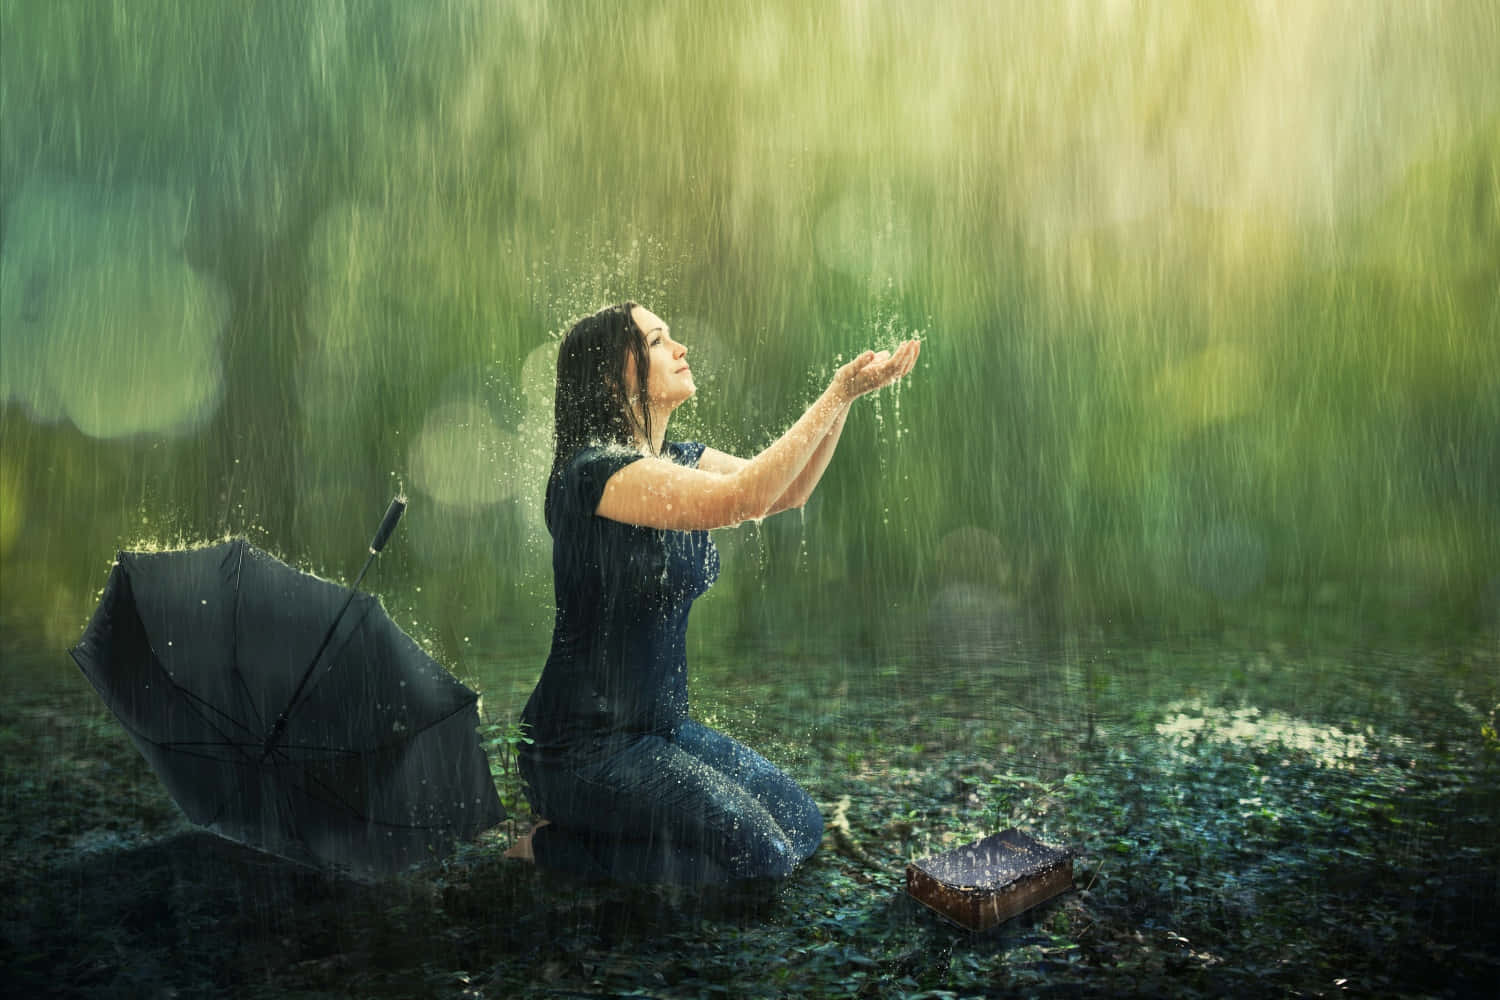 A Woman Kneeling Down In The Rain With An Umbrella